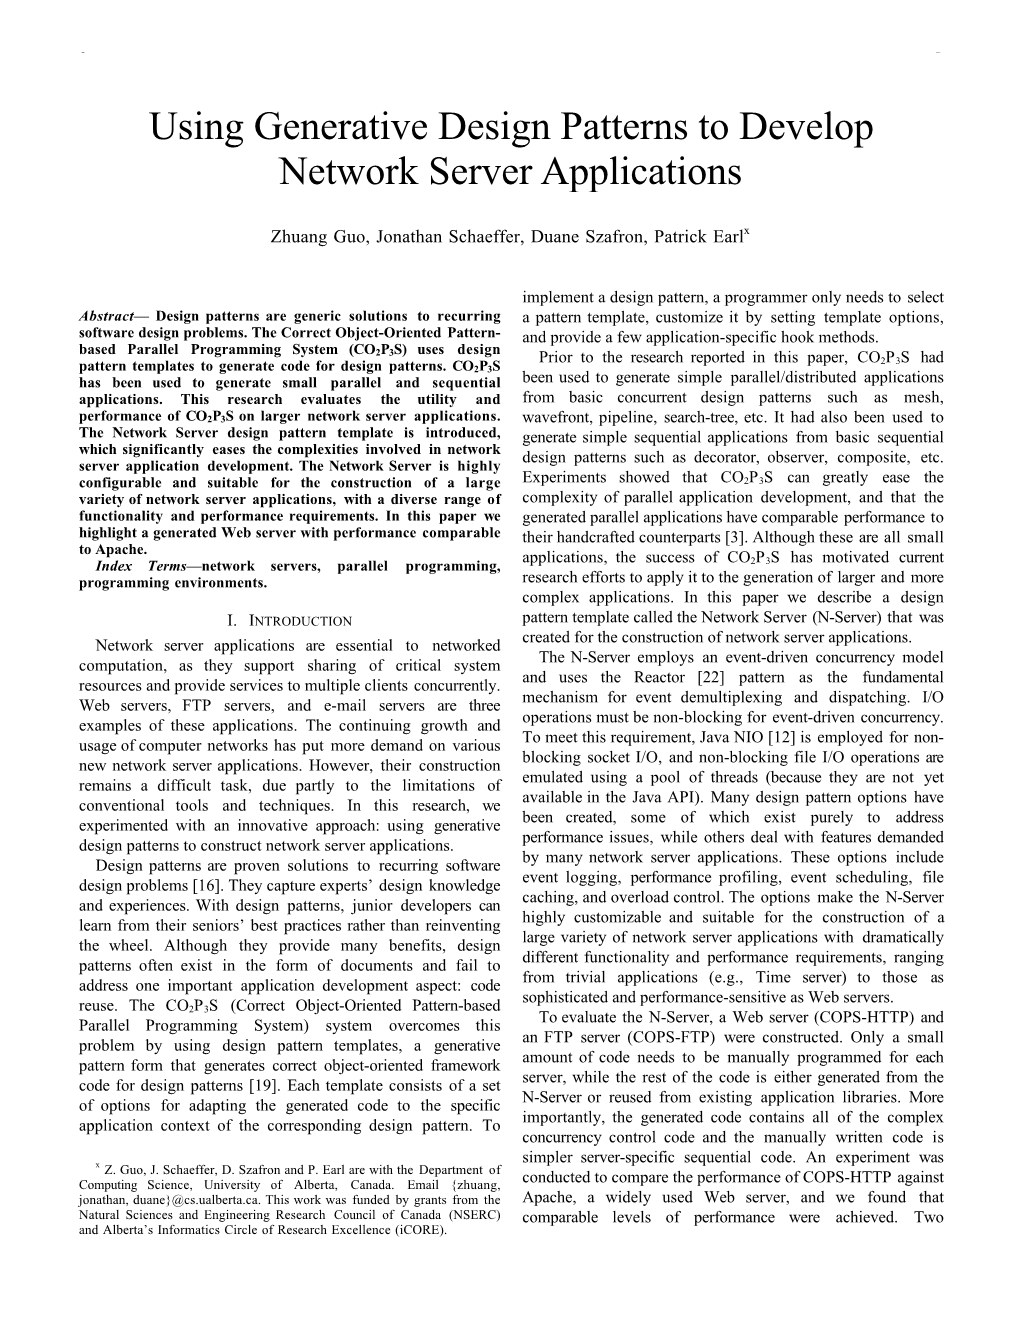 Using Generative Design Patterns to Develop Network Server Applications